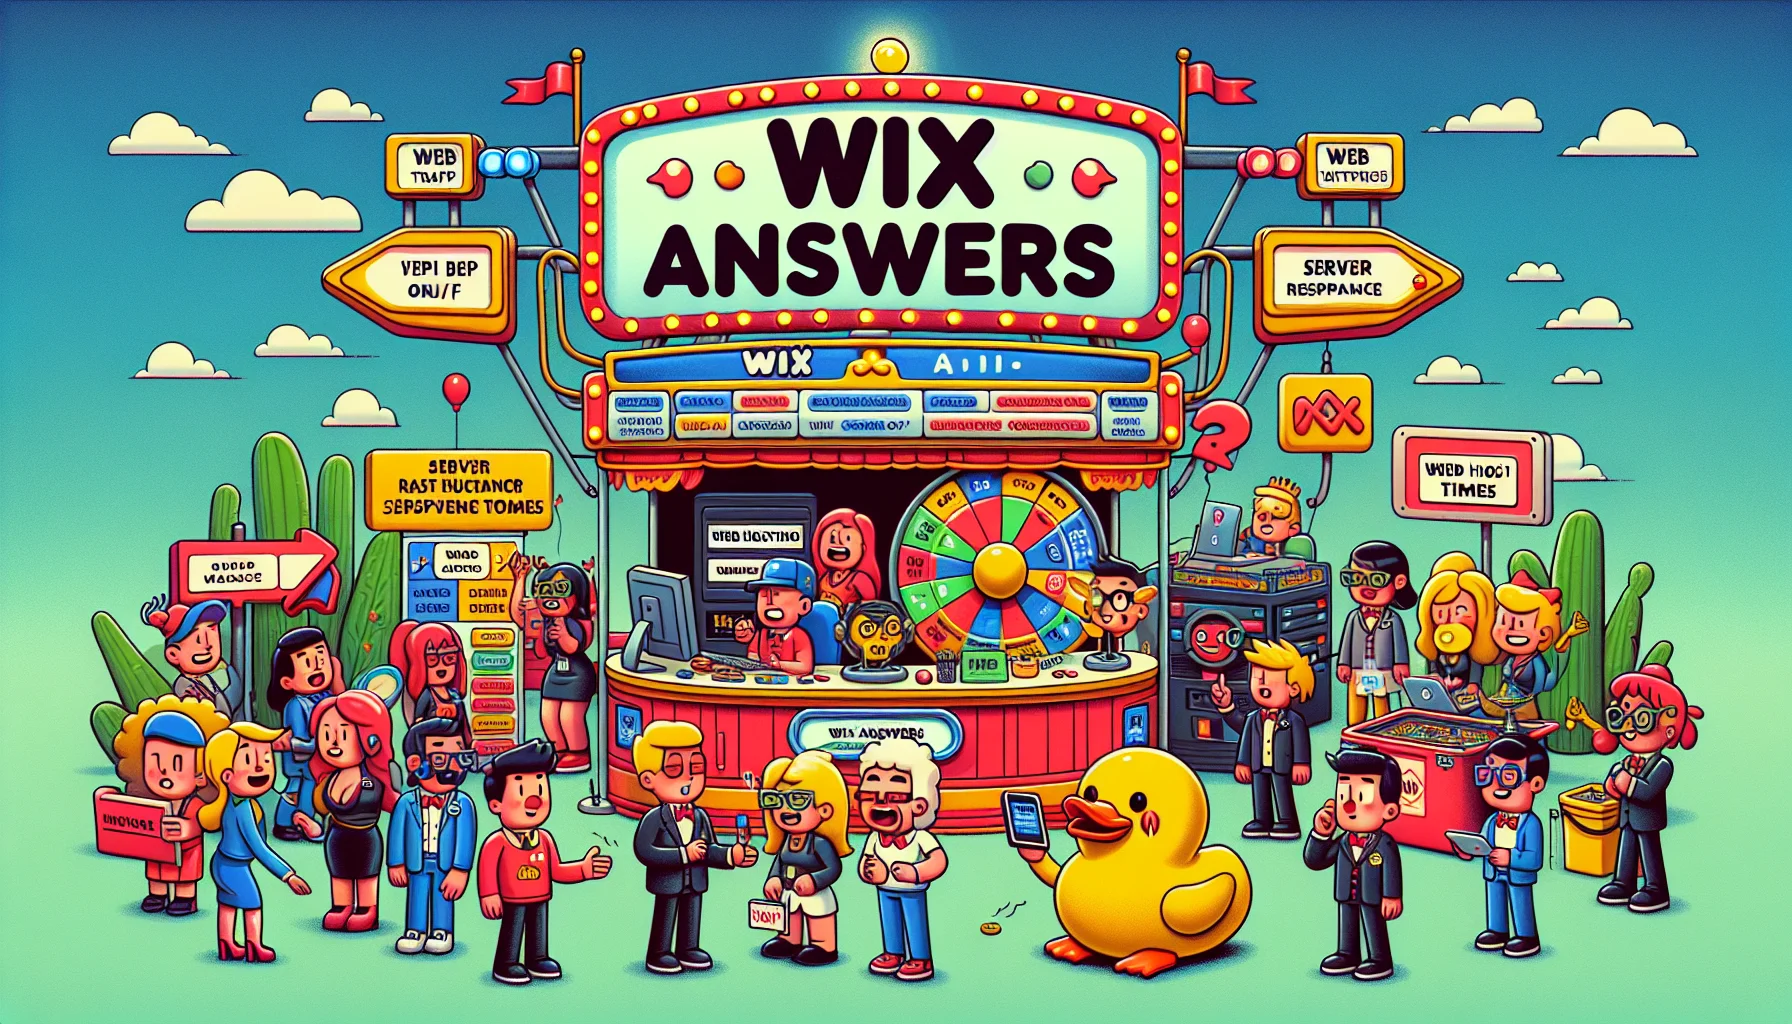 Generate an image depicting a humorous scenario related to web hosting. In this scene, a group of cartoon characters, represented by diverse genders and descents, are running a web hosting convention. There is a large, brightly colored stand labeled 'Wix Answers', which looks almost like a carnival booth. The booth is filled with symbols and props associated with web hosting, such as a rubber duck wearing glasses examining a computer, a massive red switch labeled 'Web Traffic On/Off', and a roulette wheel labeled 'Server Response Times'. This entertaining setting should evoke a sense of amusement and charm related to Wix's web hosting services.